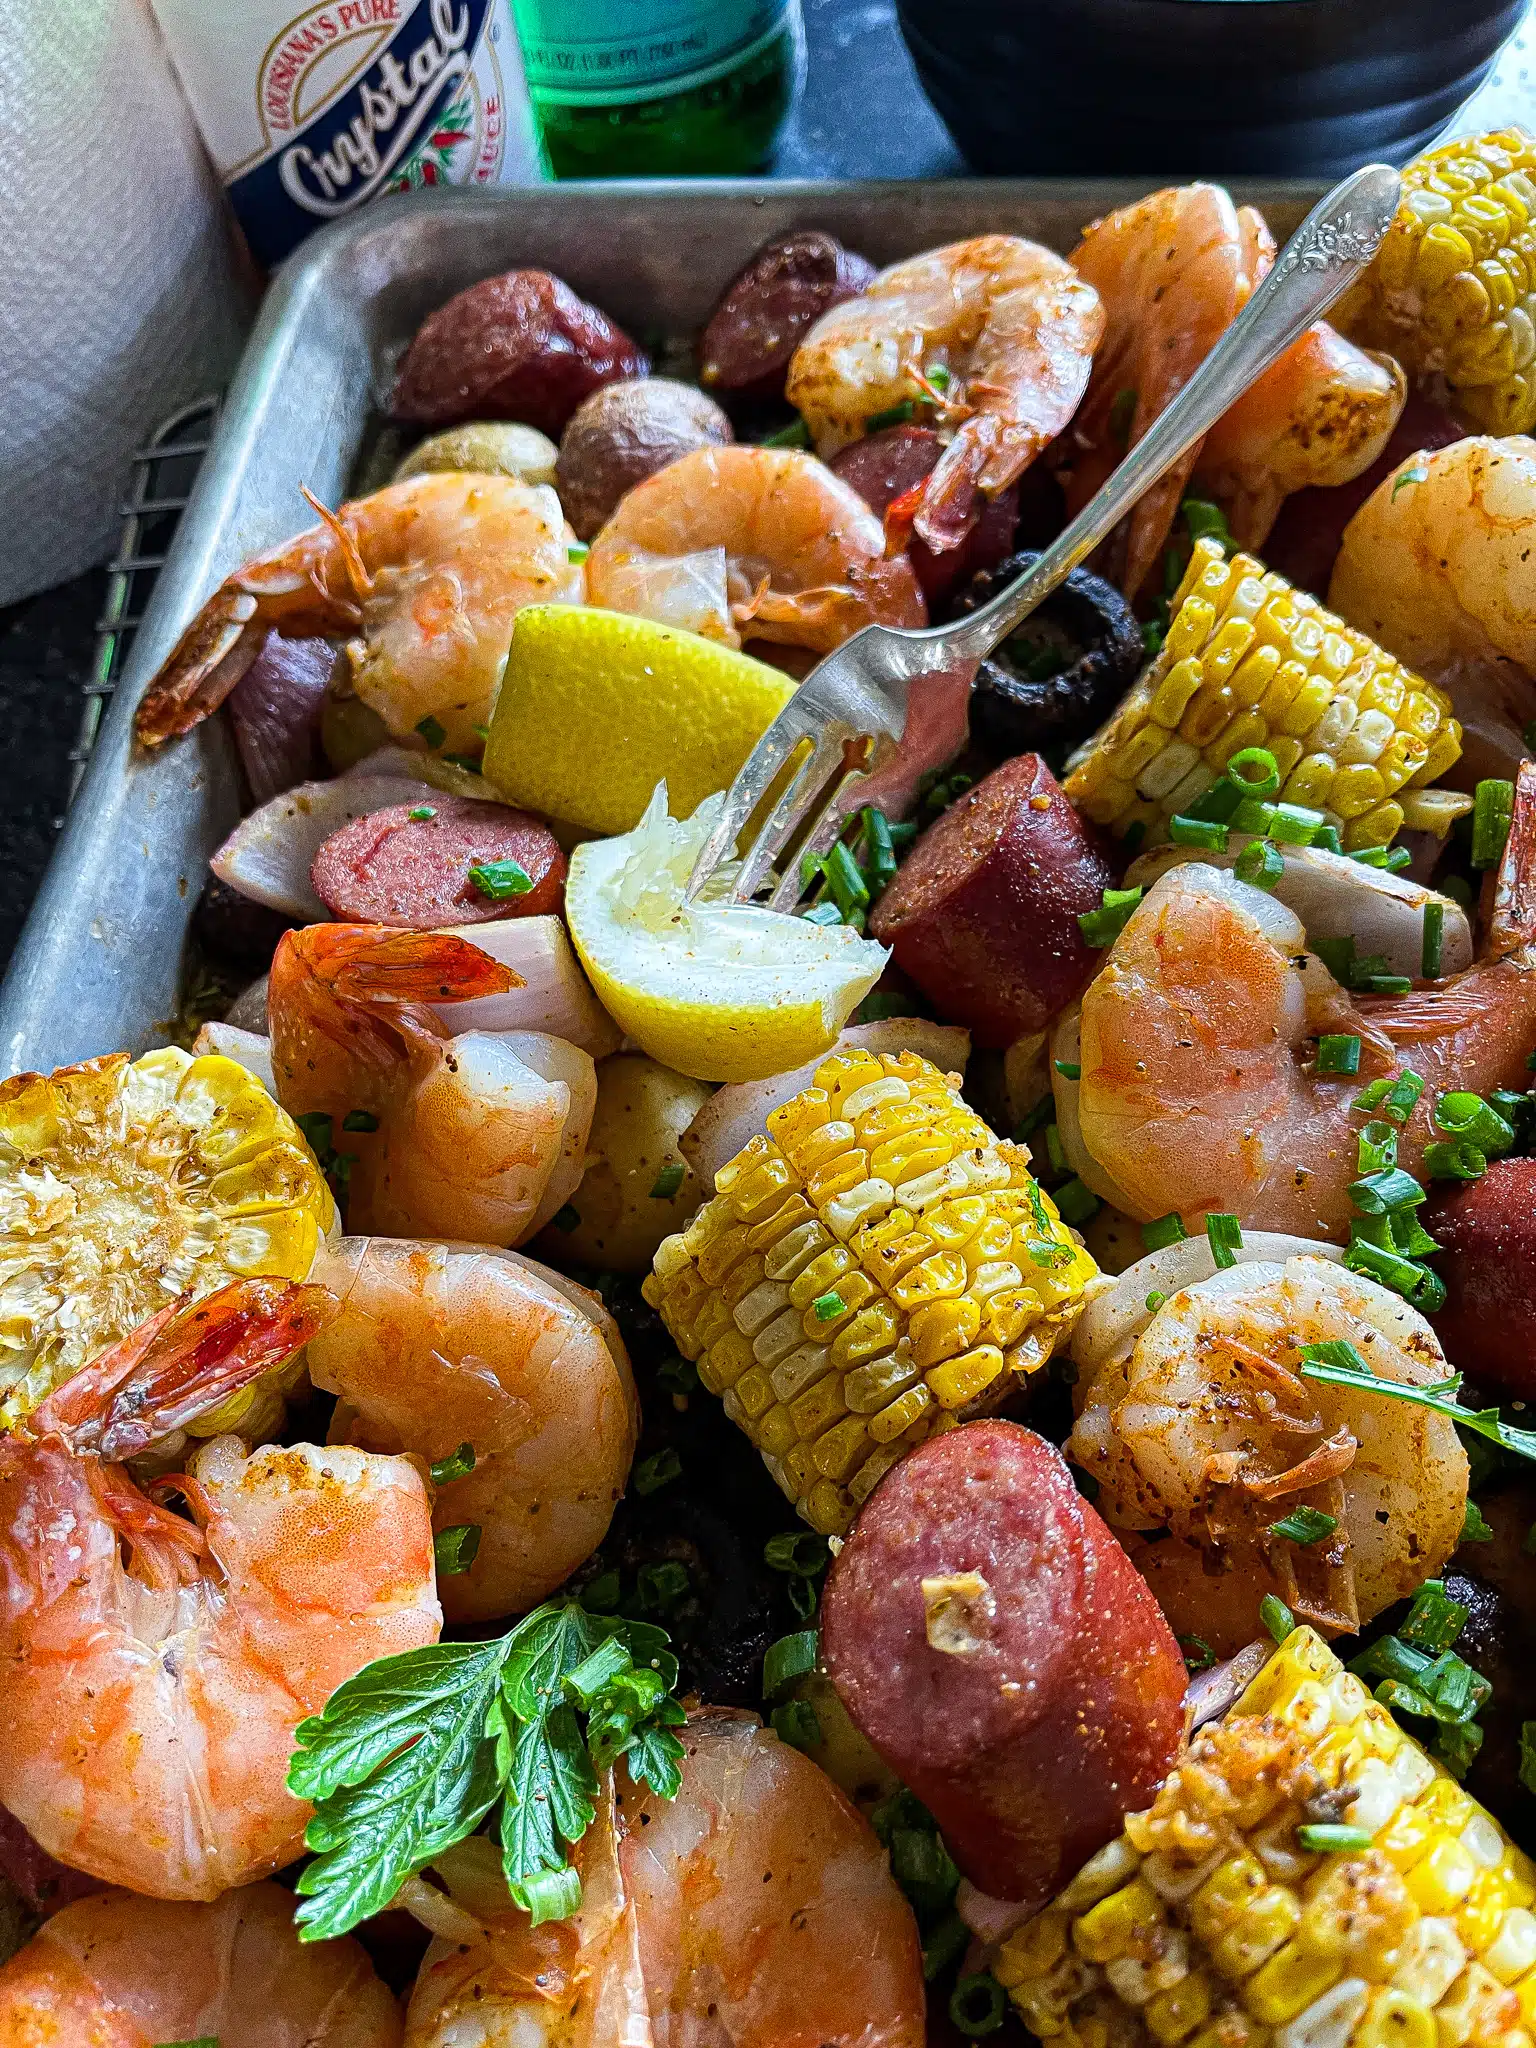 shrimp, potatoes, corn, mushrooms, and sausage roasted on a sheet pan with a side of remoulade